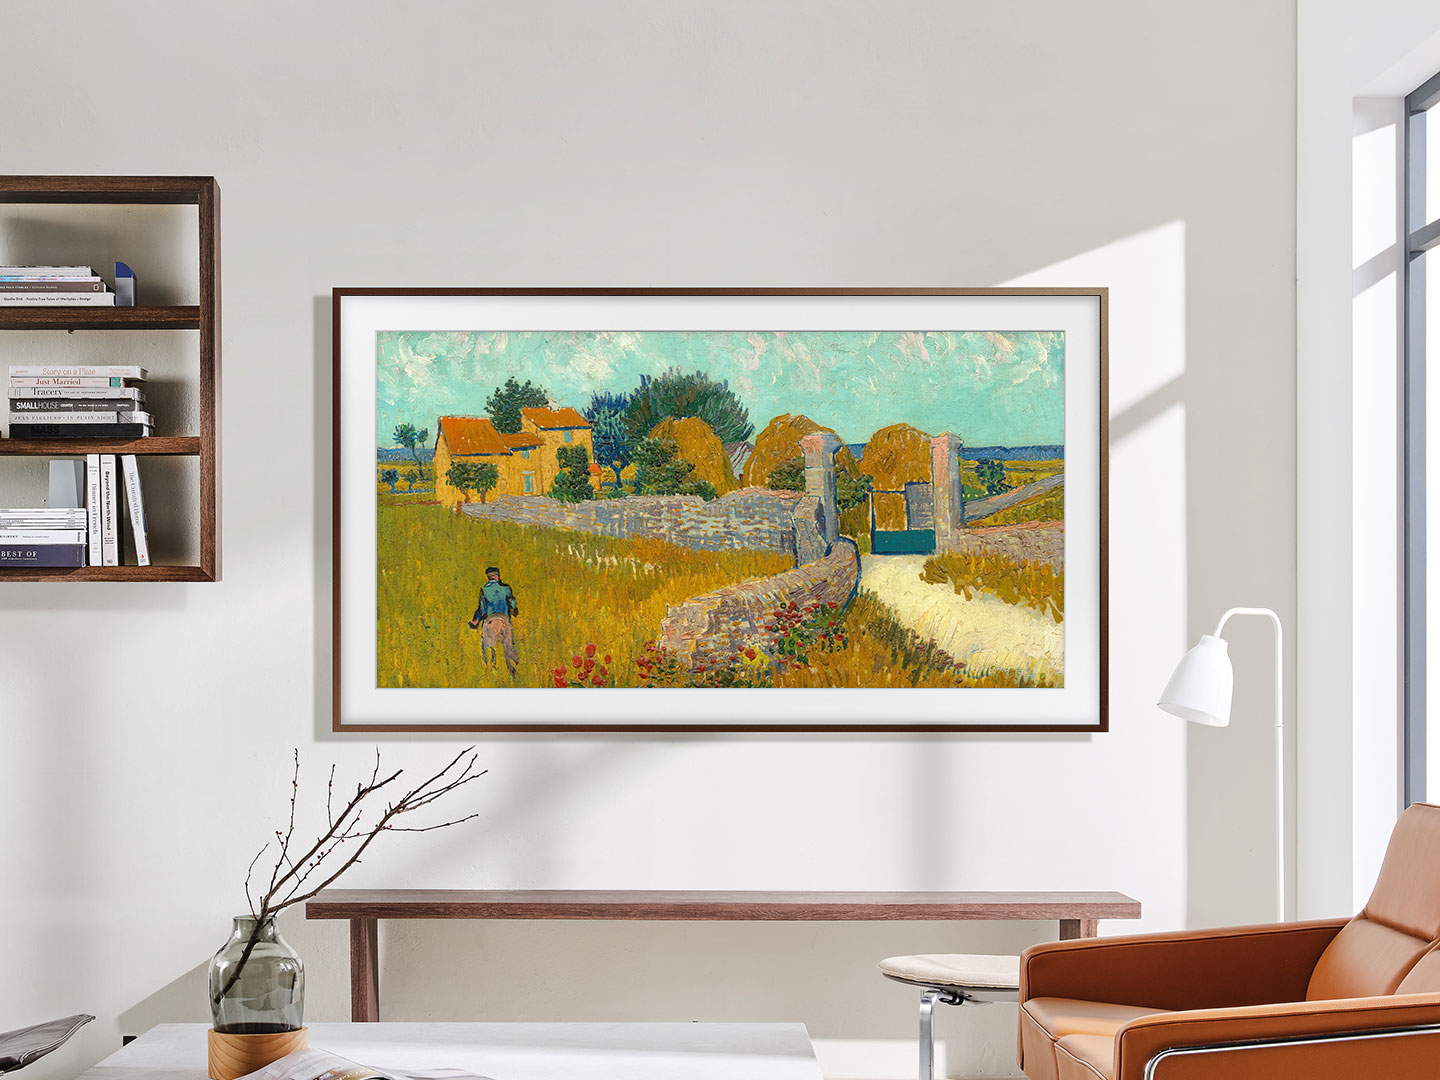 Artwork, shows, movies and memories—display what you love on The Frame, the picture frame-like TV.